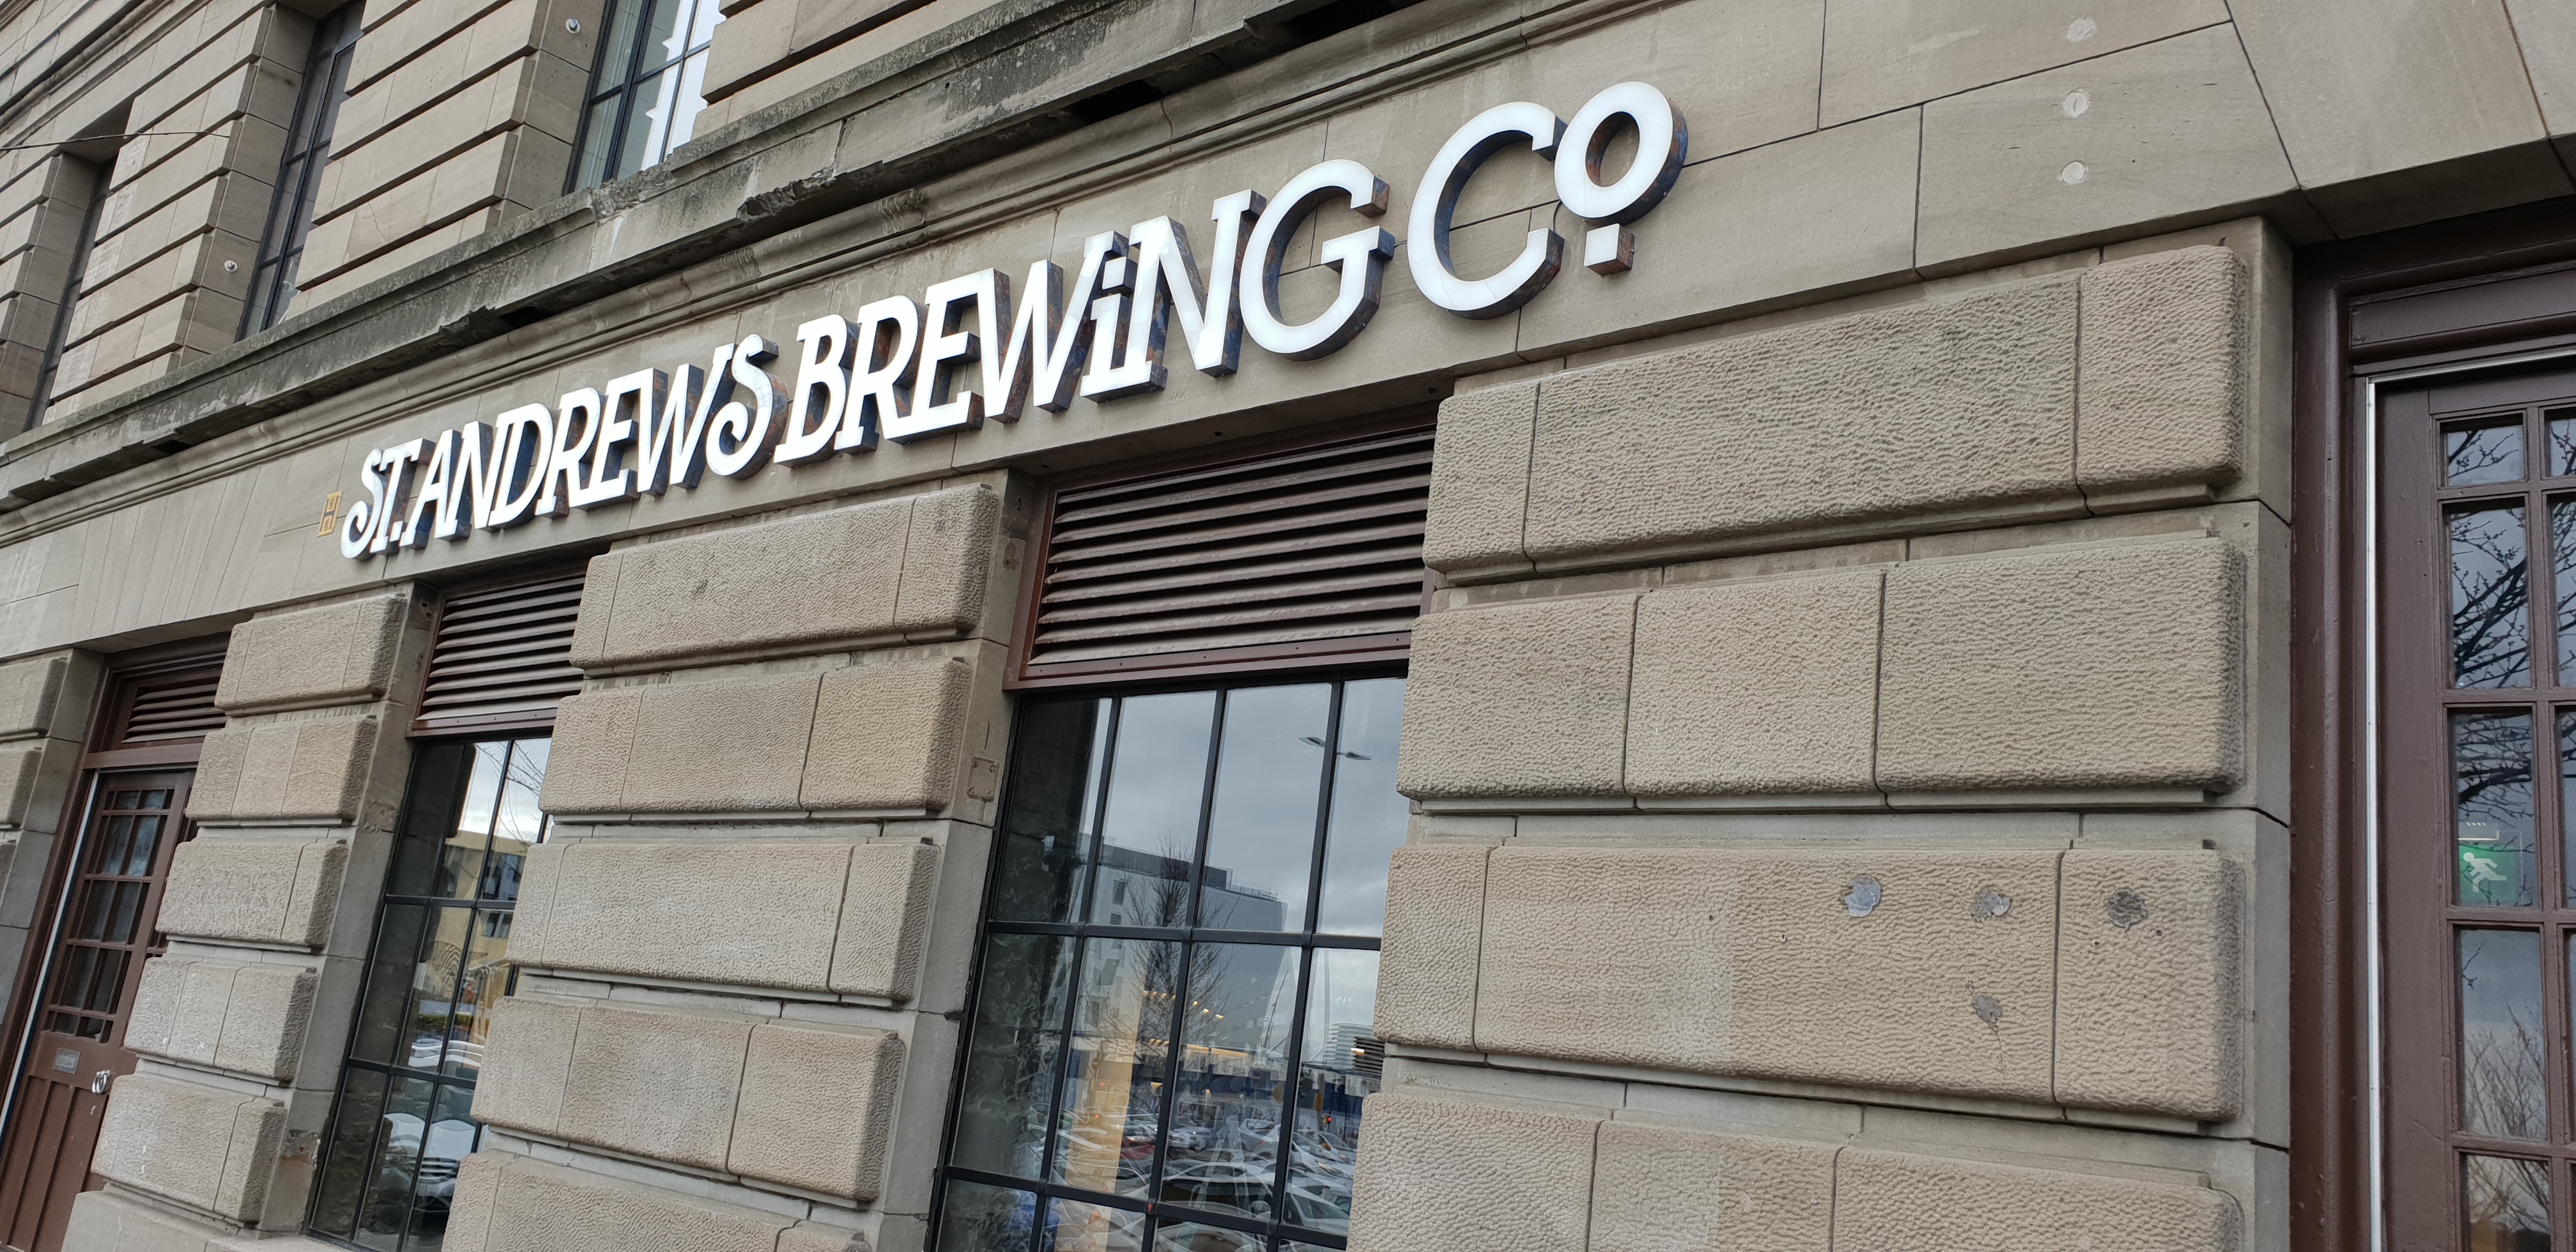 Hardies completes brewing company’s project in Dundee